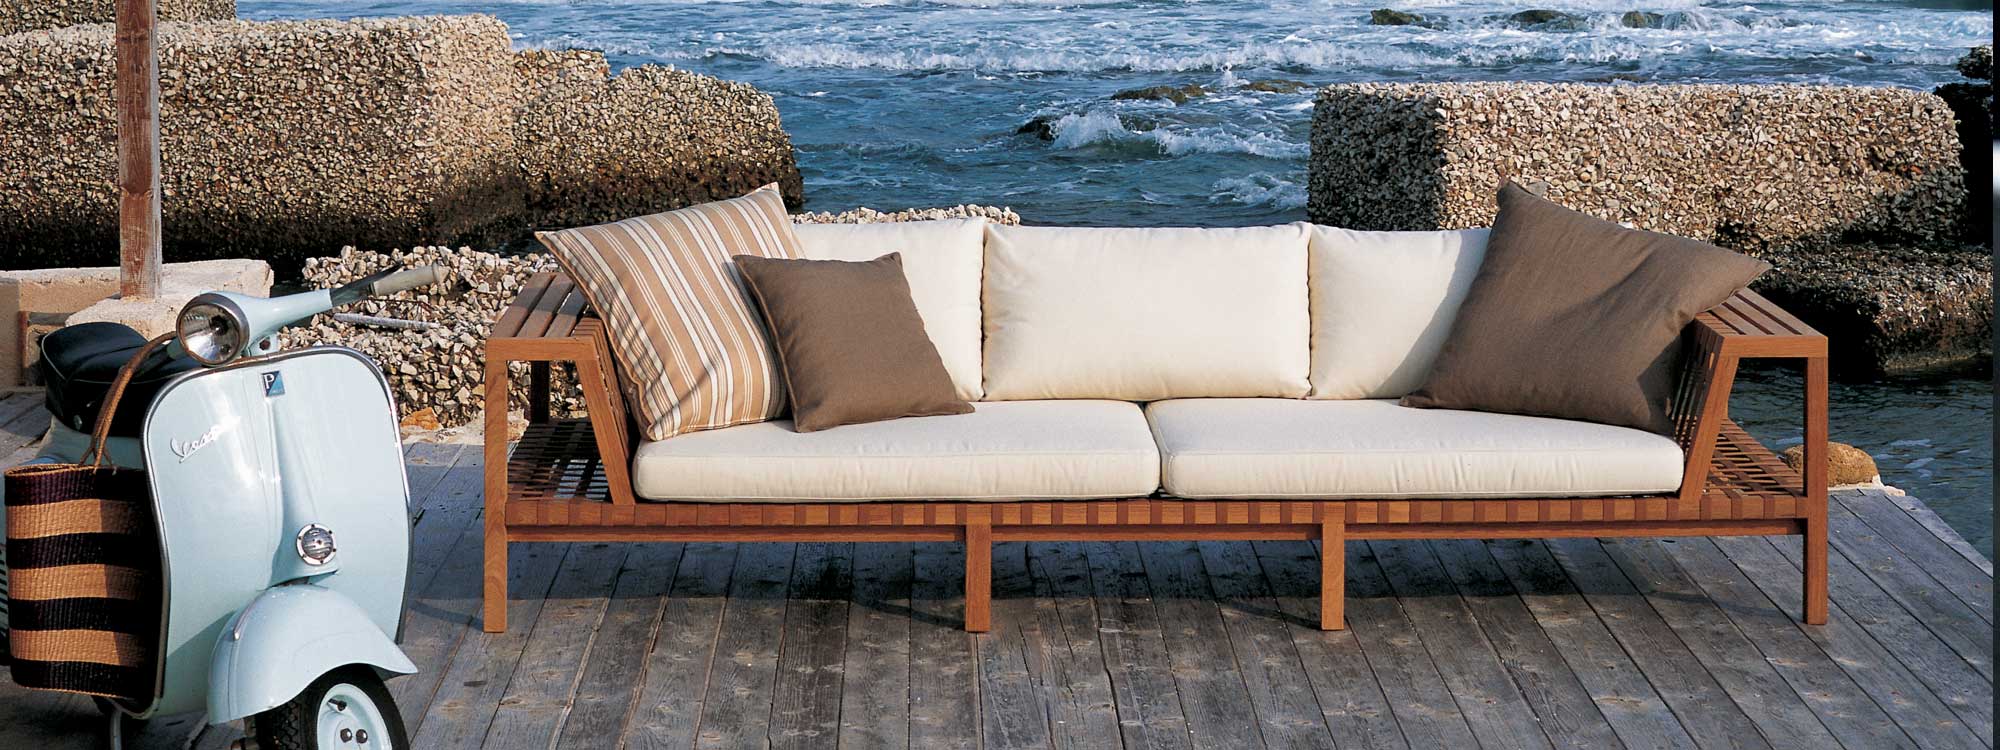 Image of RODA Network teak sofa with Tobacco webbing and White cushions with breaking waves in the background